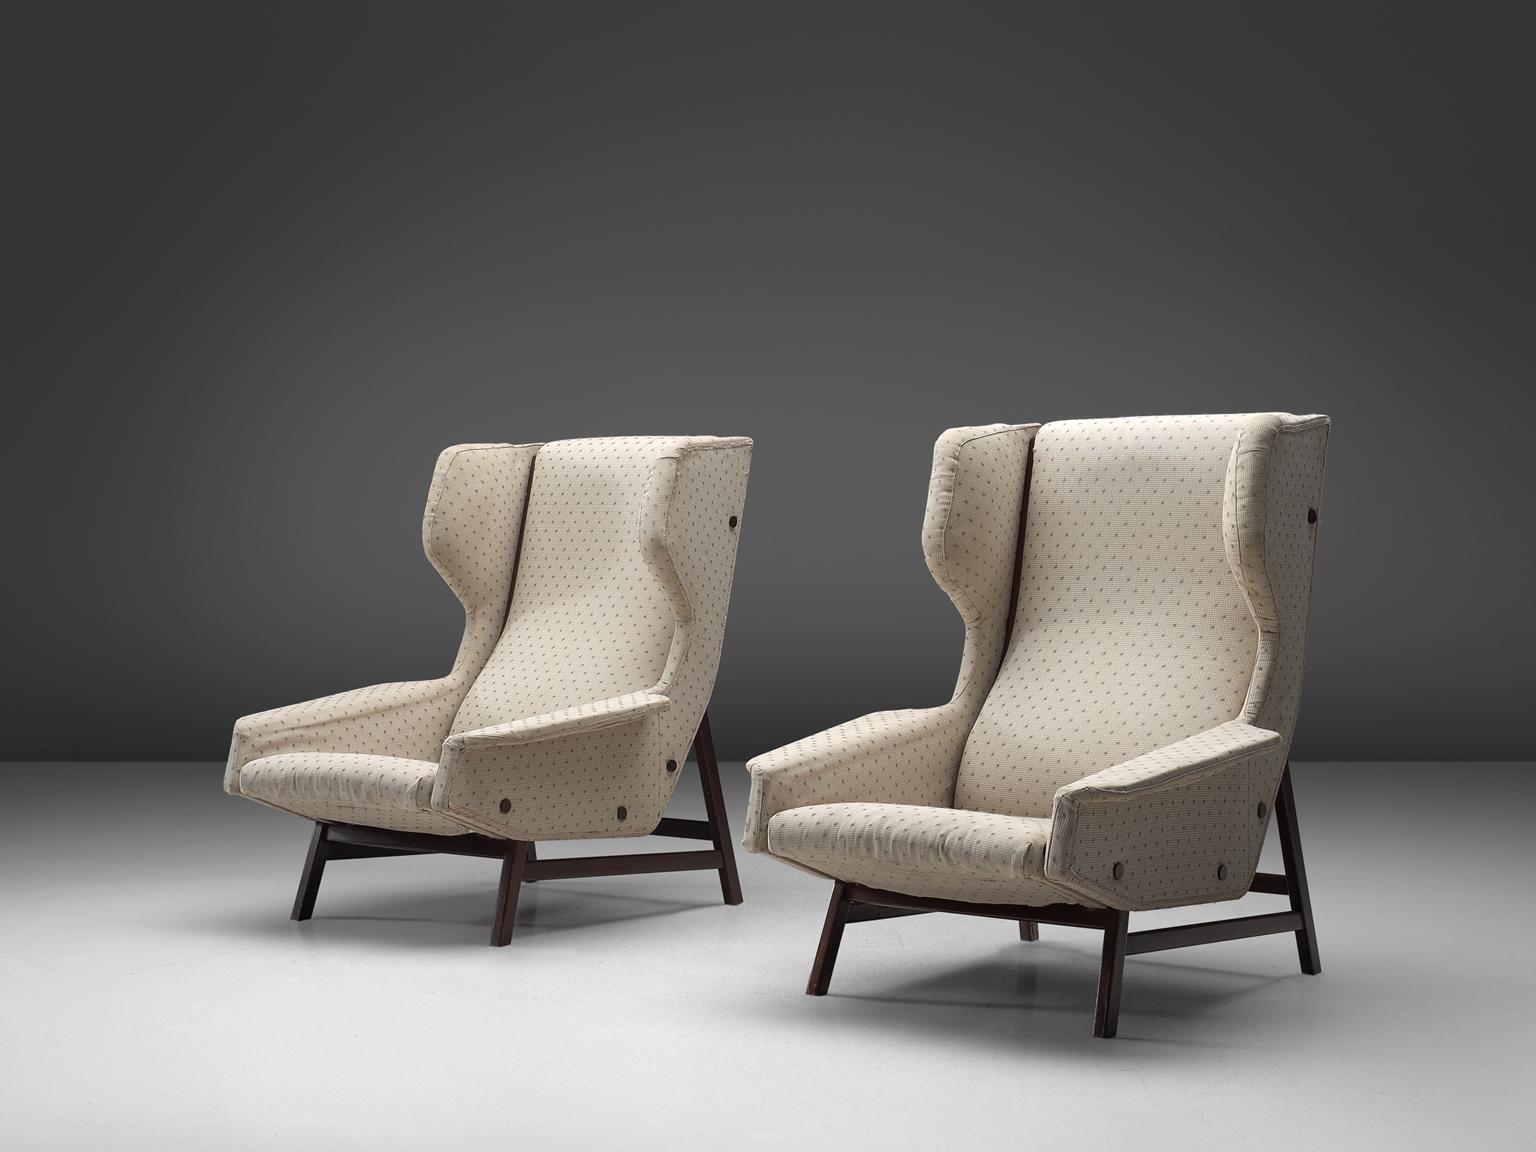 Gianfranco Frattini for Cassina, lounge chair model 877, white fabric and rosewood, Italy, circa 1959.

Sturdy and voluminous lounge chair in blue original fabric. This wingback chair shows nice details and elegant lines. The buttons on the